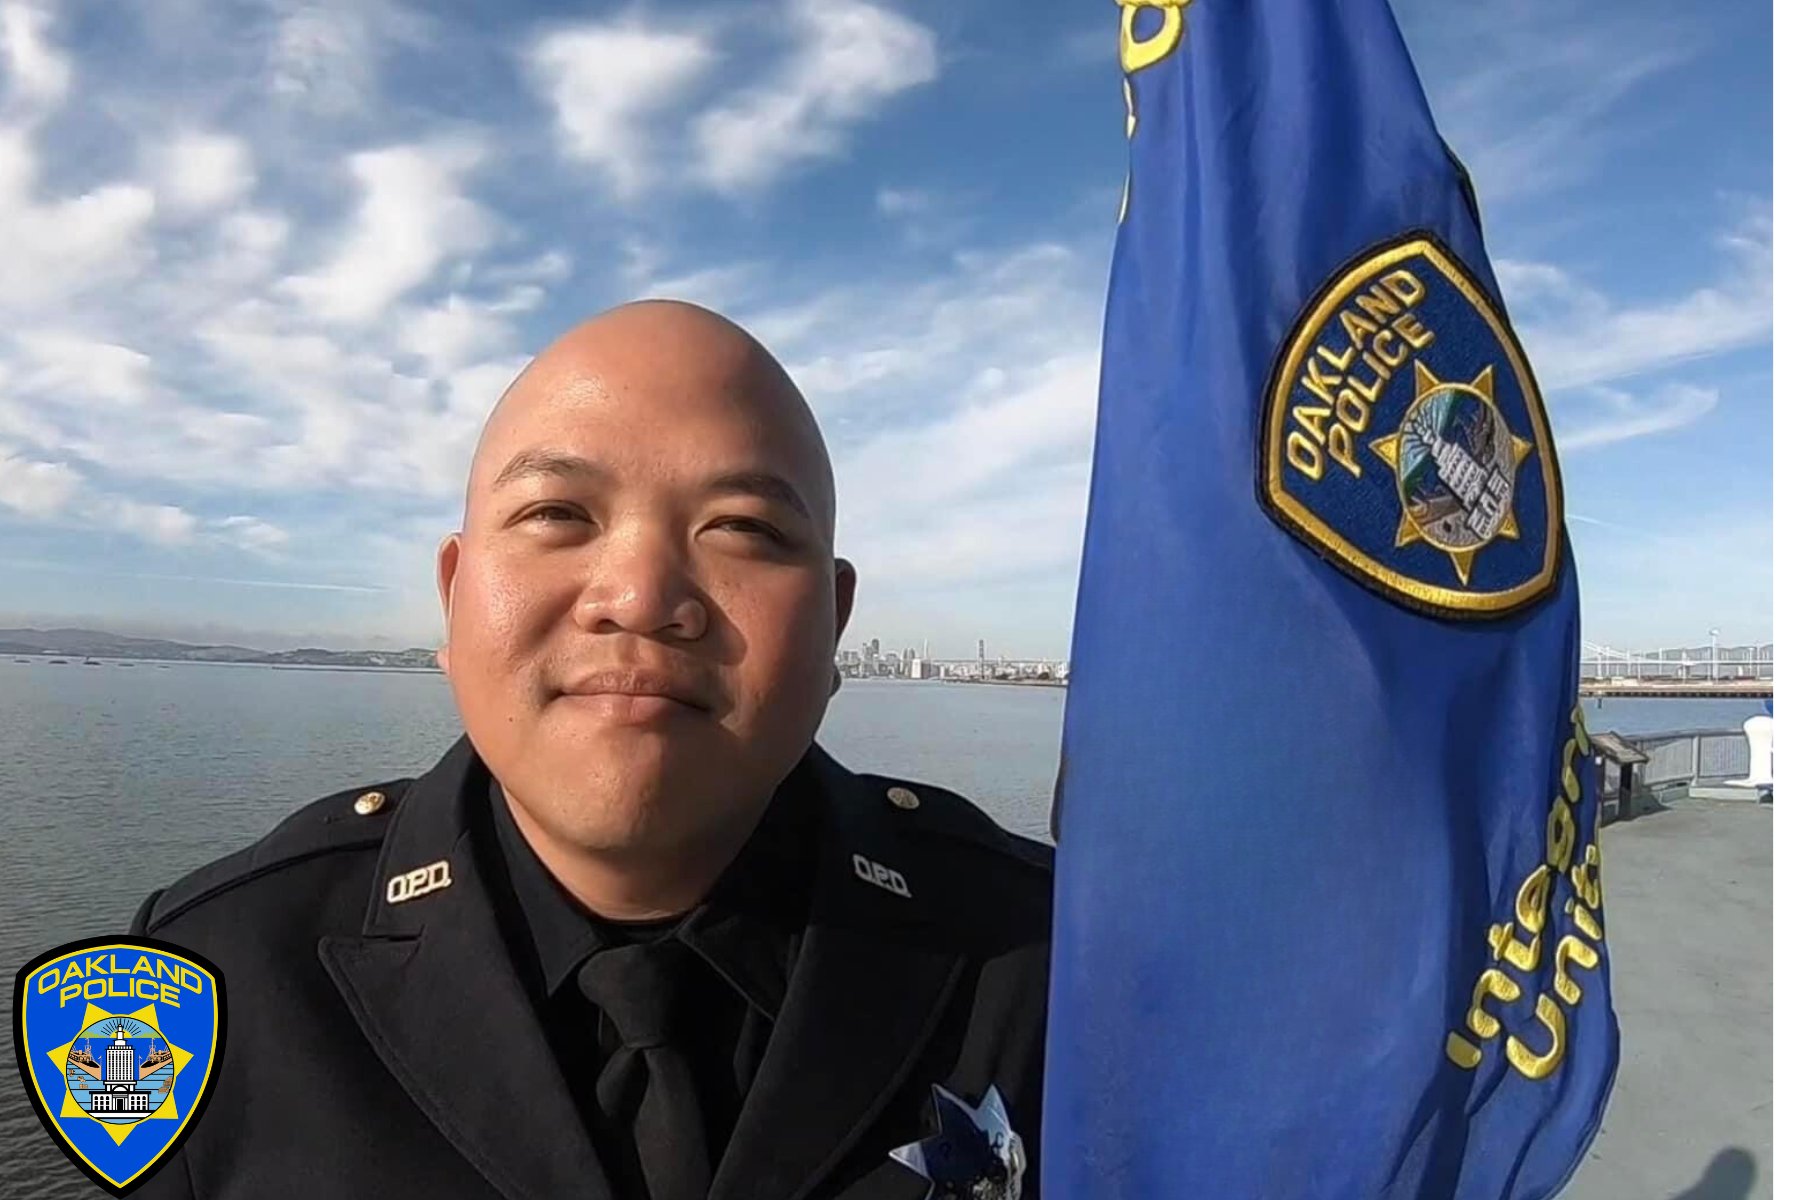 Oakland police Officer Tuan Le was shot and killed Friday morning while responding to burglary at a cannabis business near Oakland’s Embarcadero.